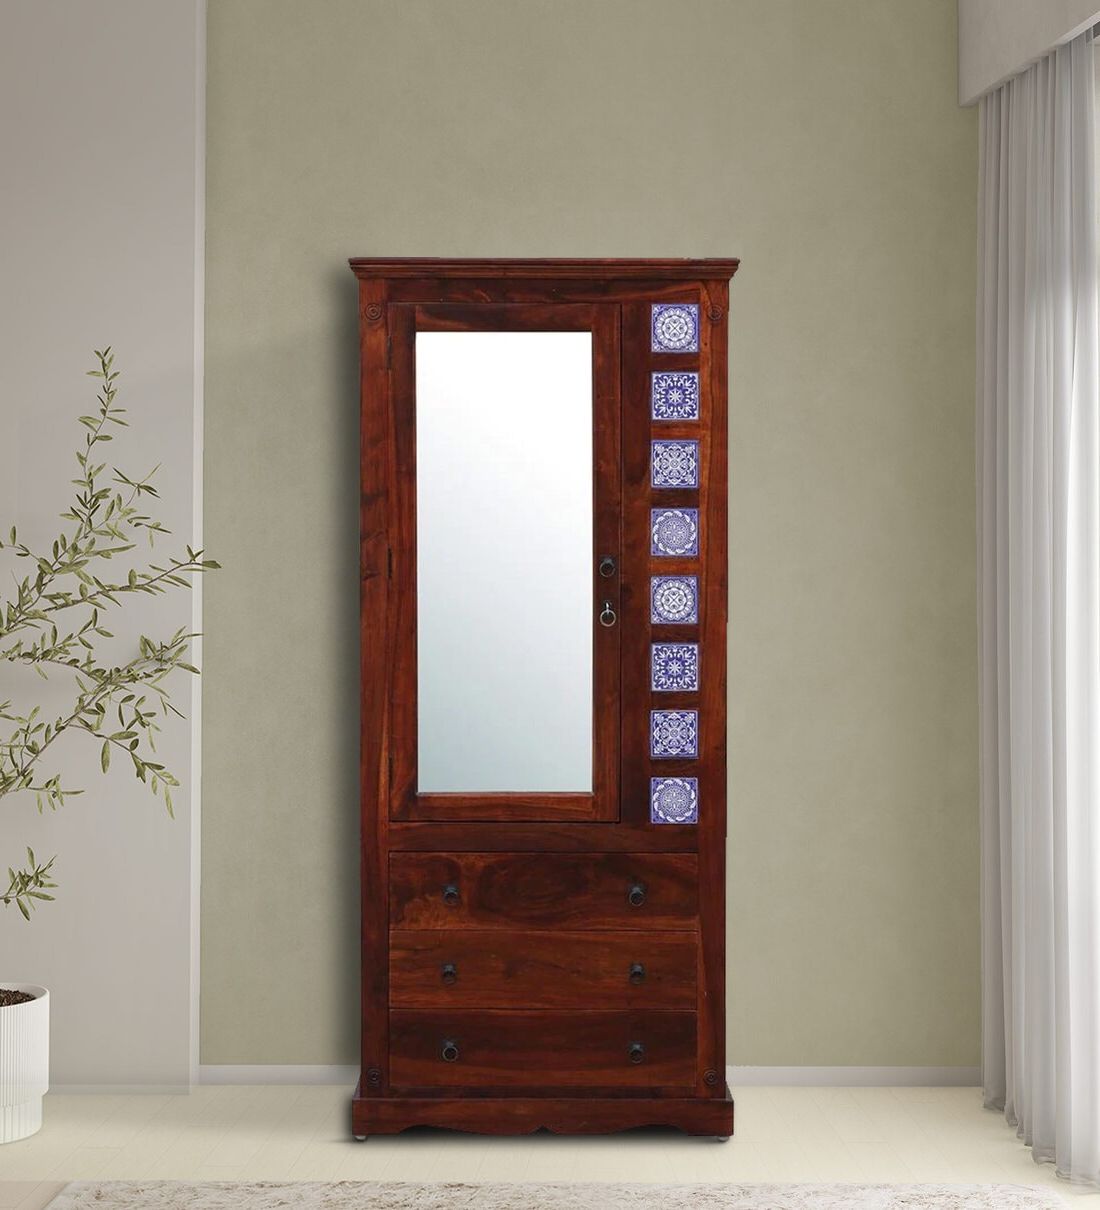 Buy Kamchini Sheesham Wood Single Door Wardrobe In Scratch Resistant Honey  Oak Finish With Mirror At 1% Offmudramark From Pepperfry | Pepperfry With Single Door Mirrored Wardrobes (View 12 of 20)